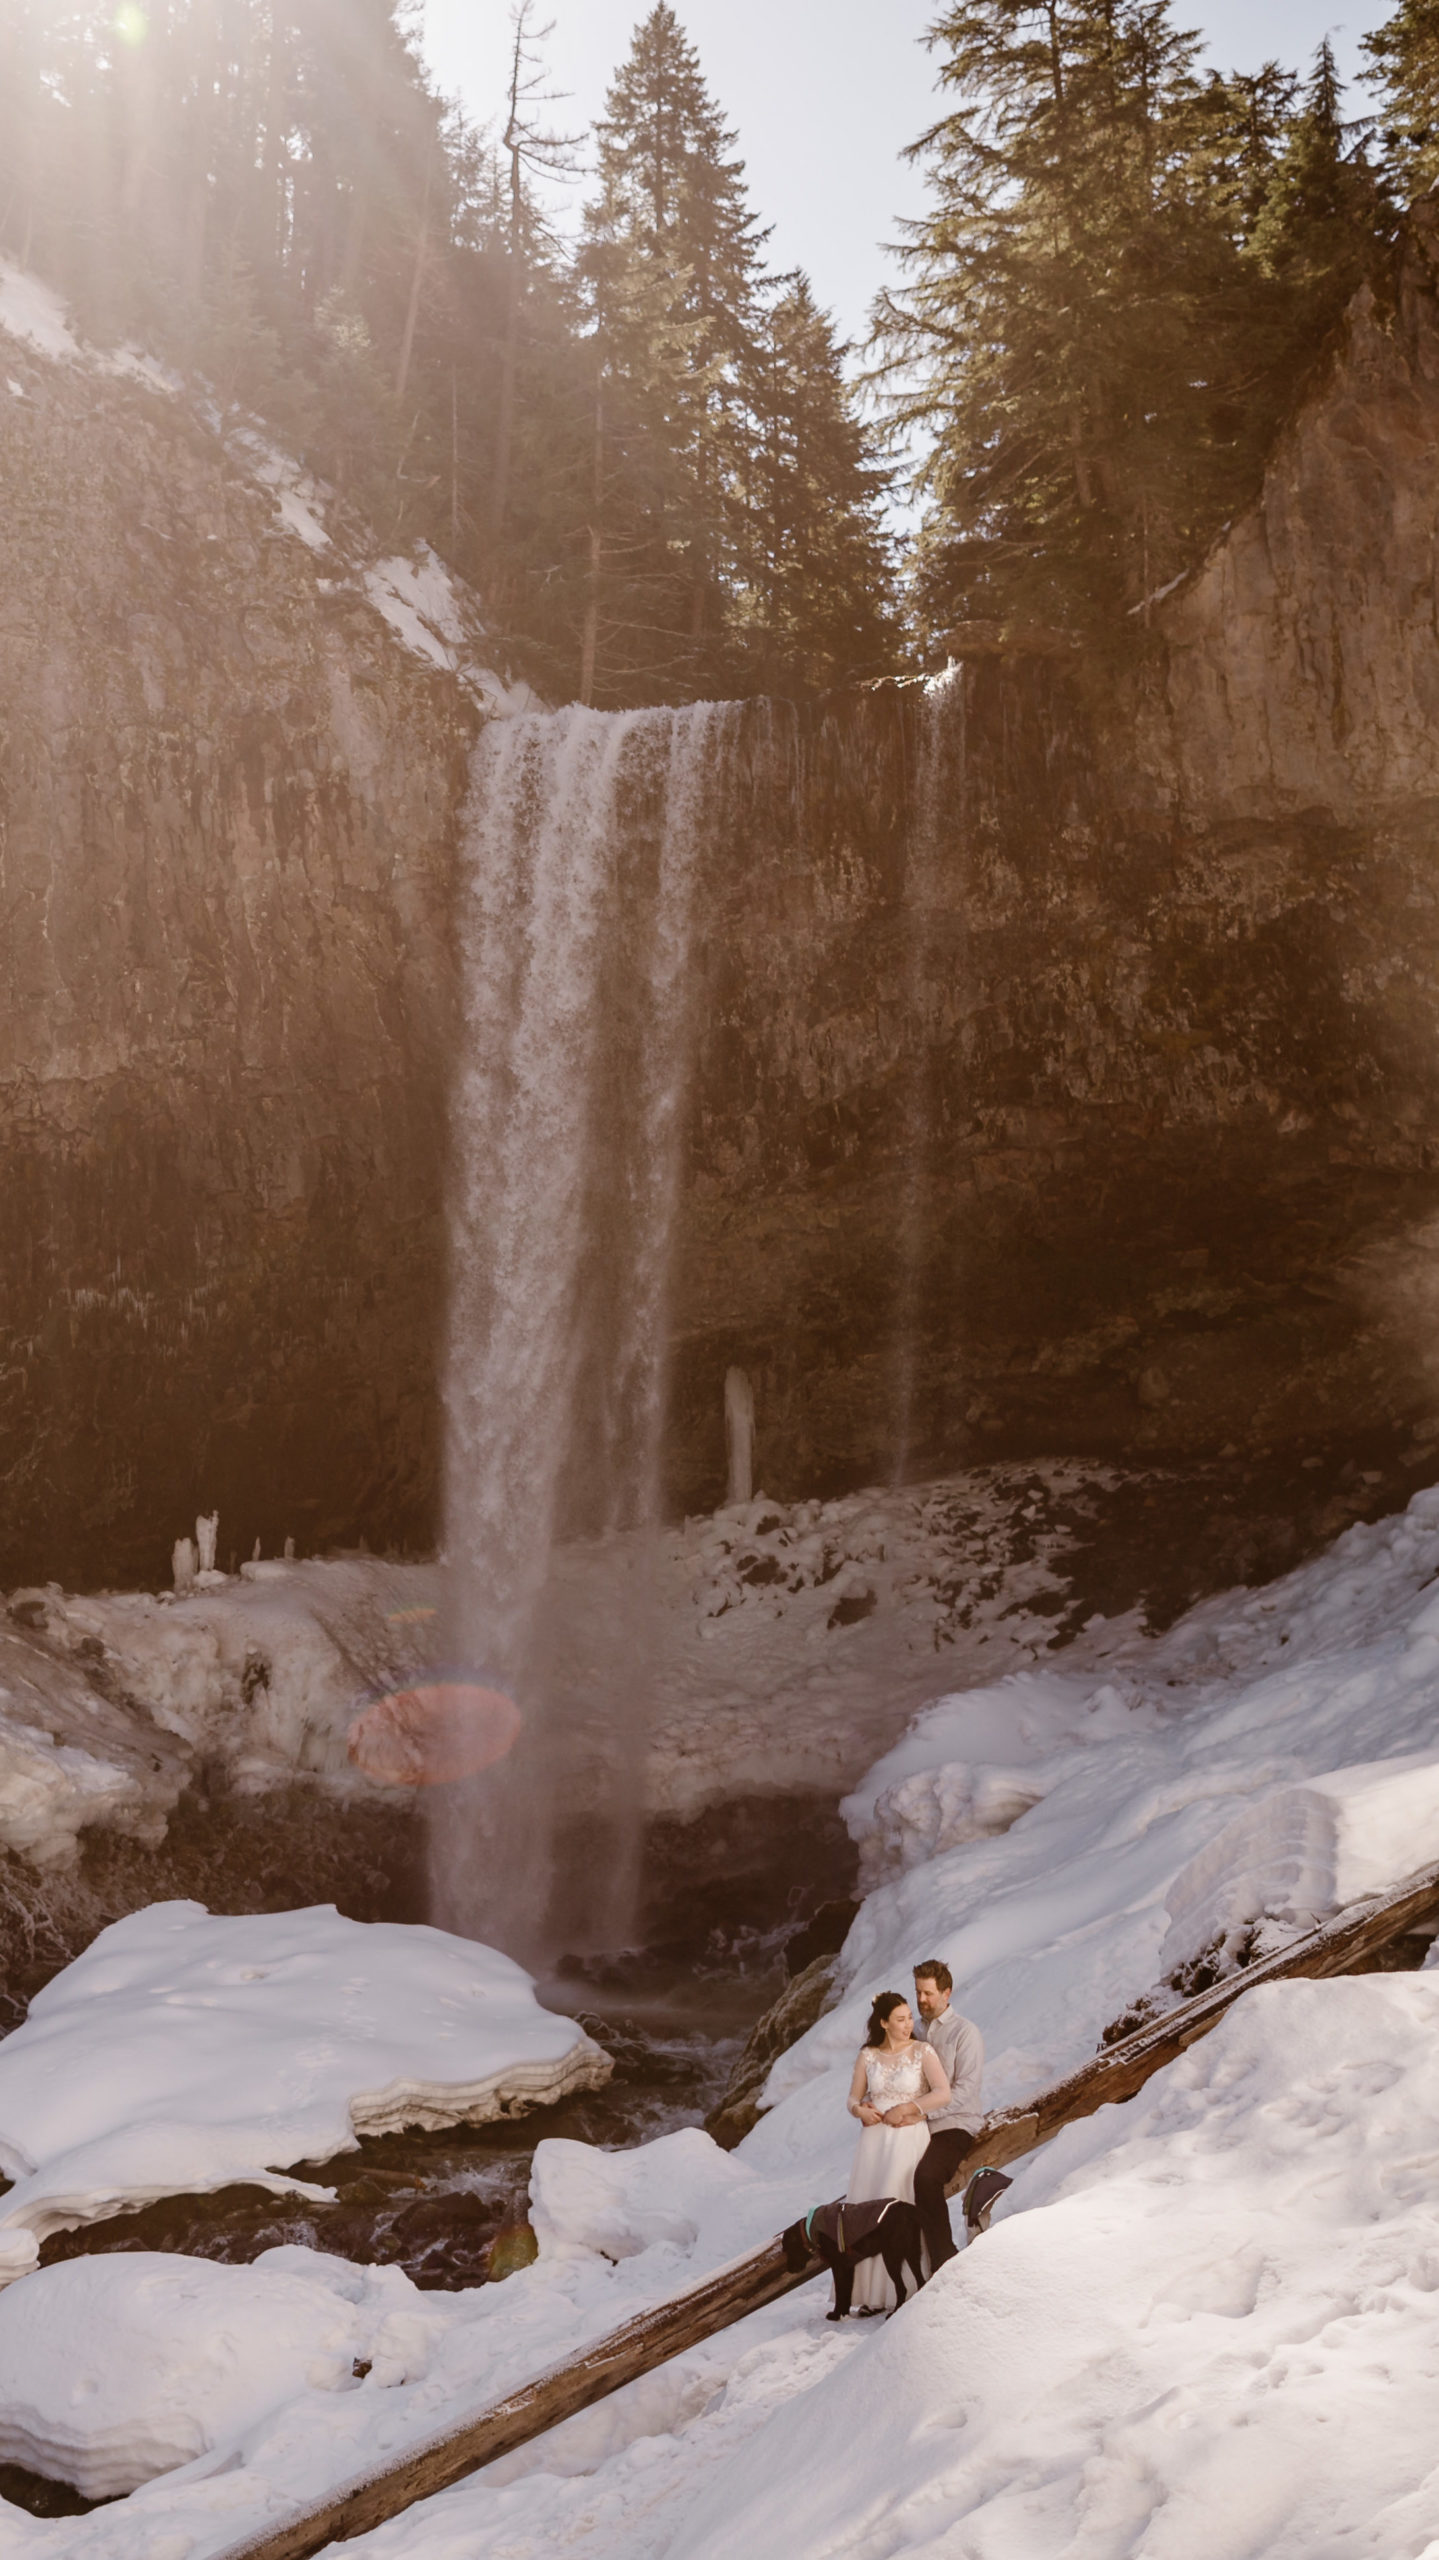 Kim and Owen elope in Tumalo falls during their winter in Oregon